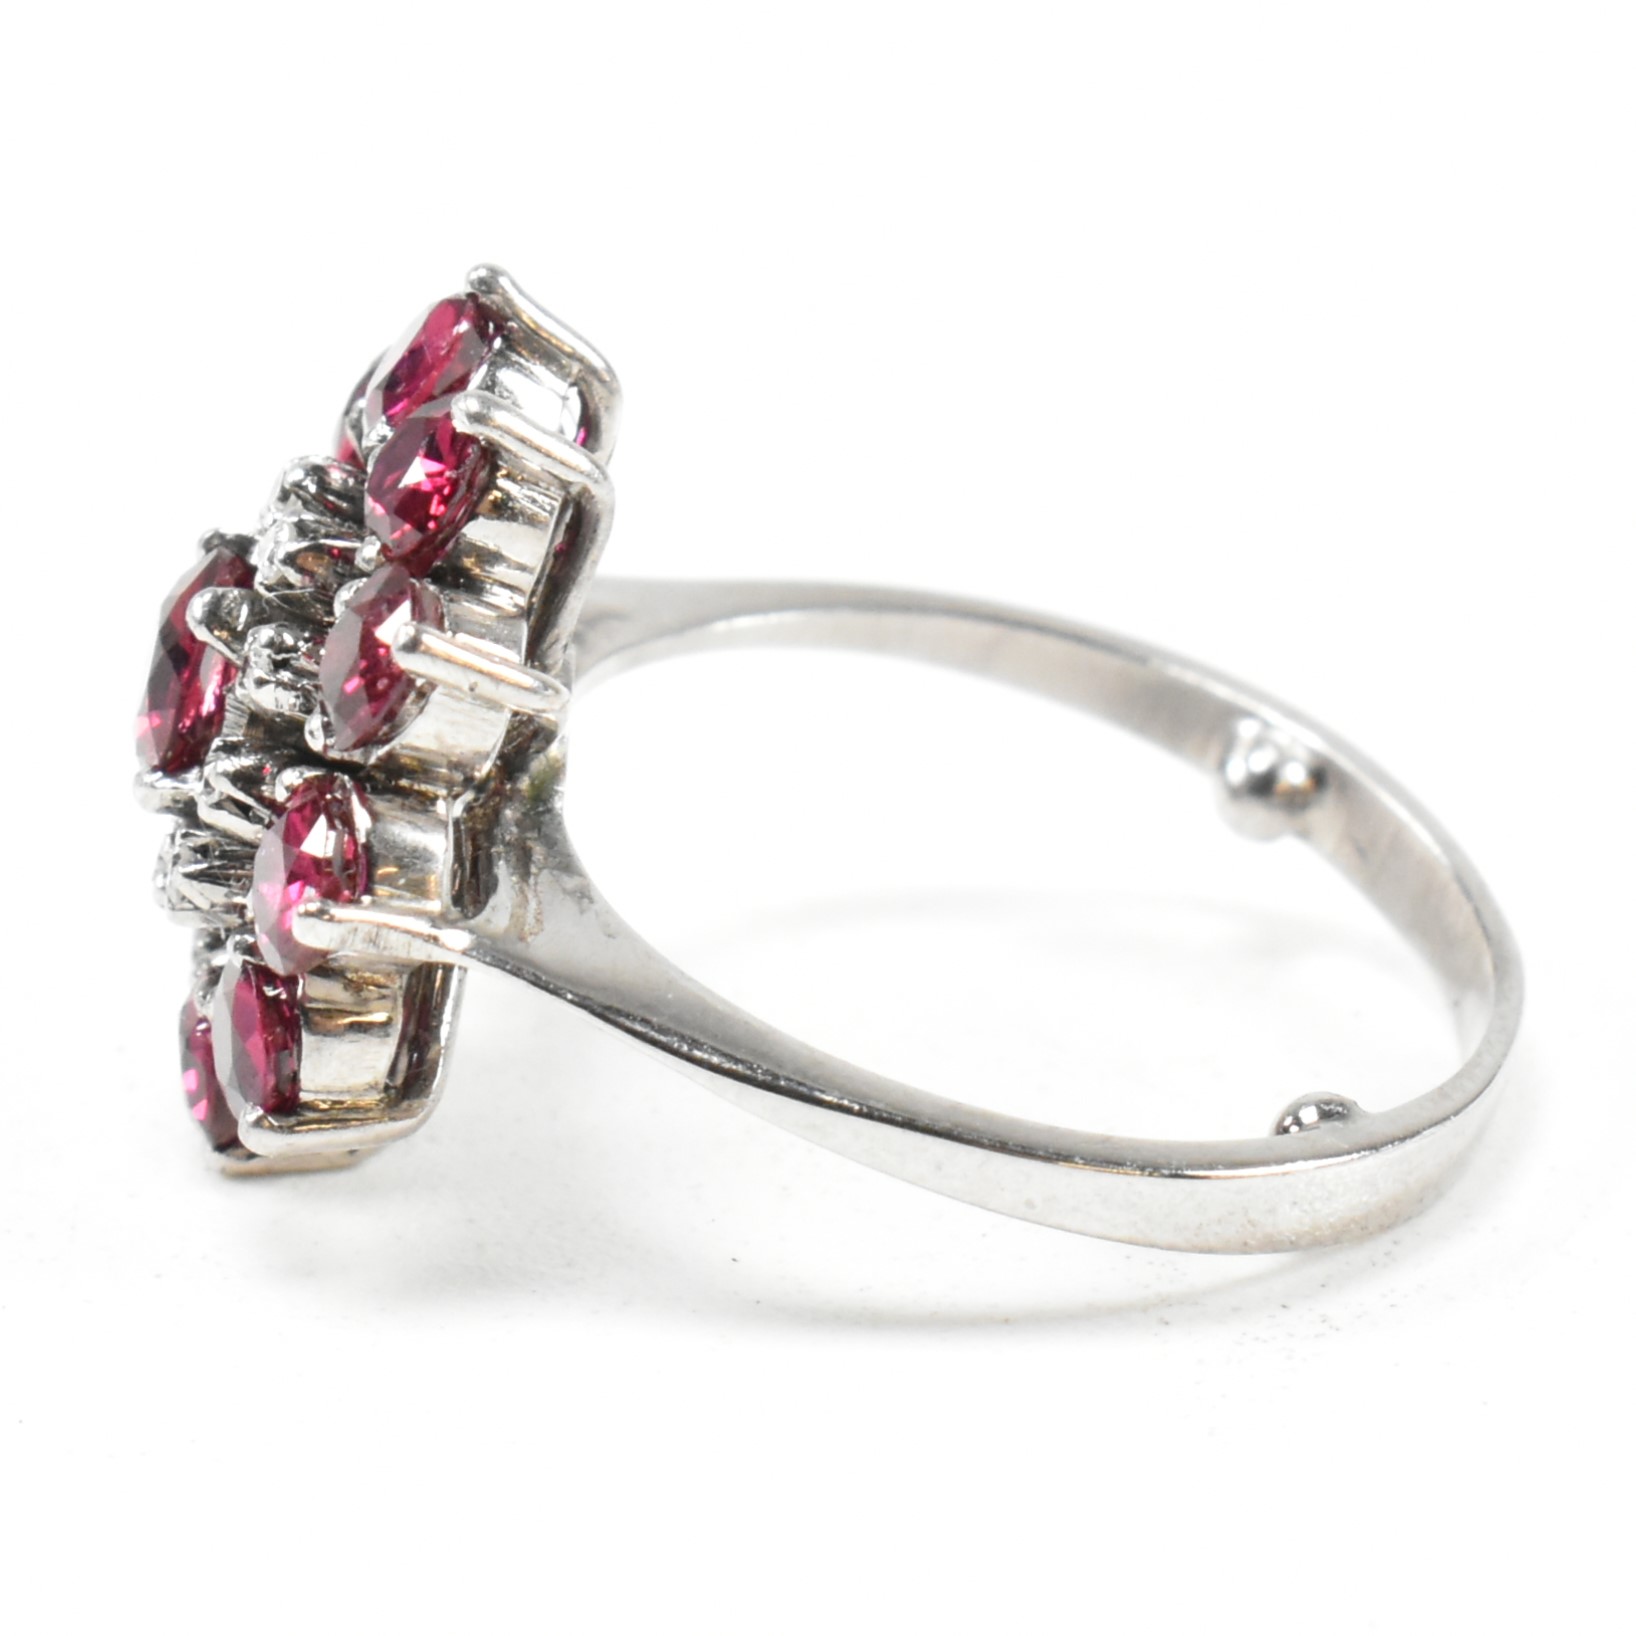 WHITE GOLD RUBY & DIAOND CLUSTER RING - Image 6 of 8